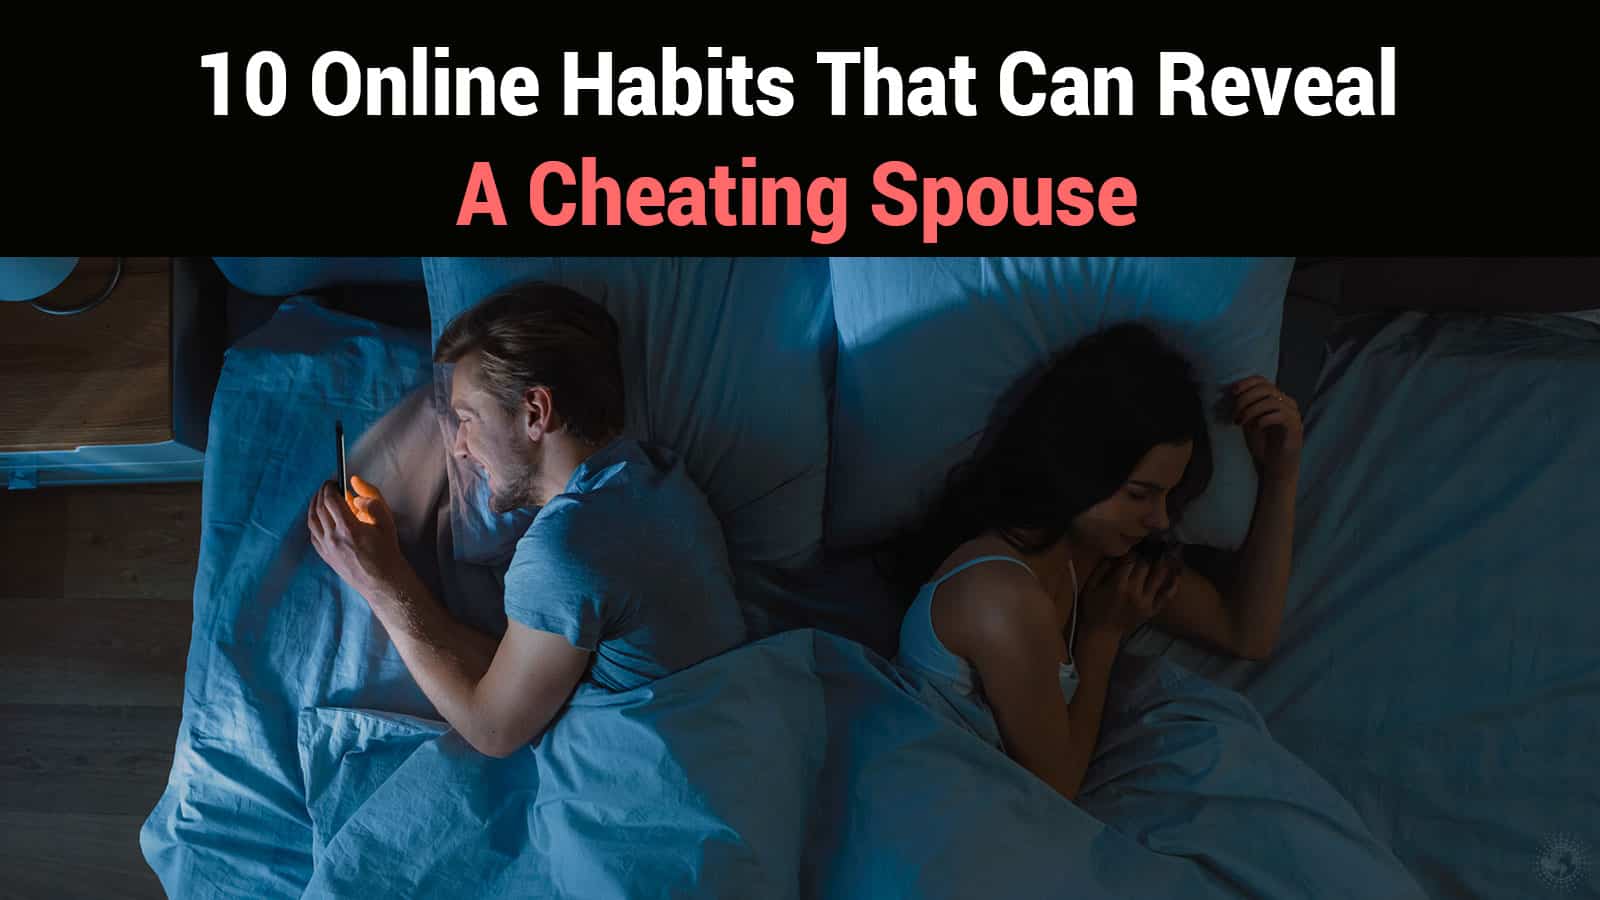 10 Online Habits That Can Reveal a Cheating Spouse